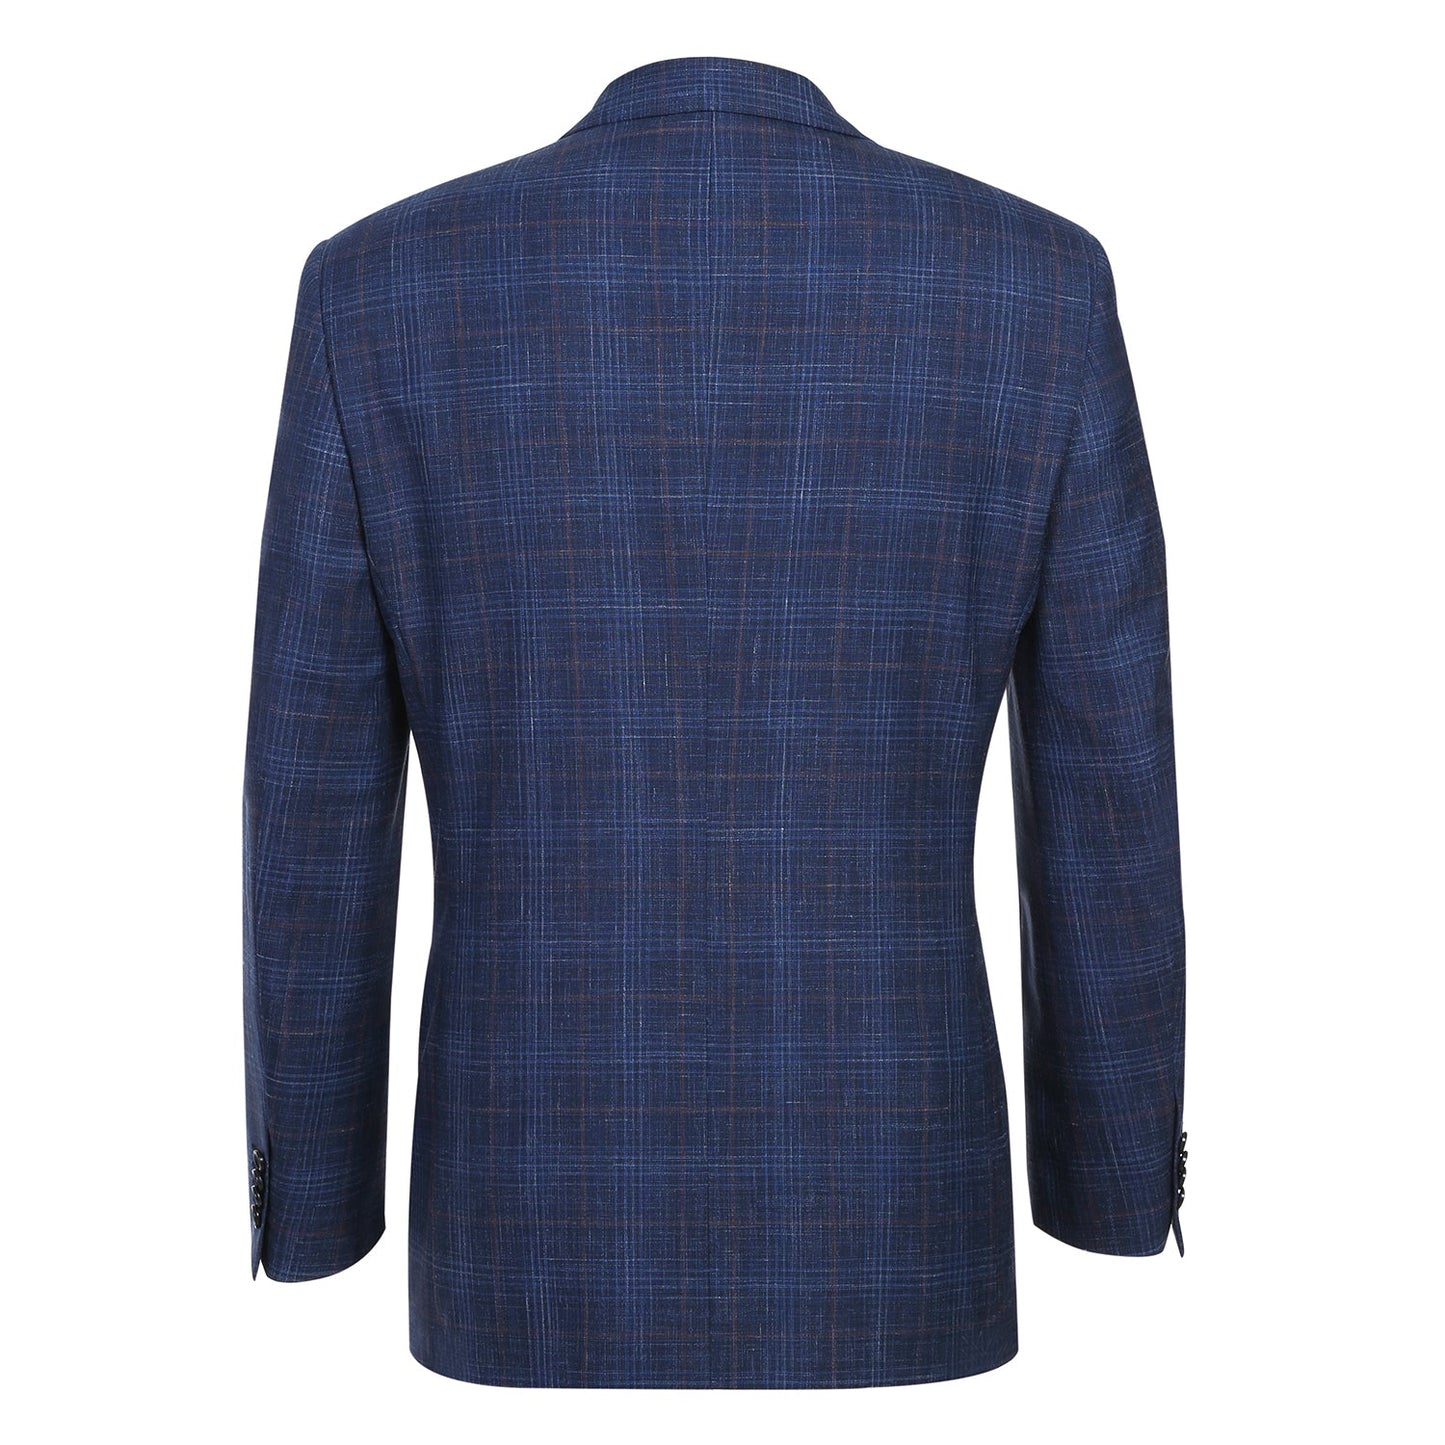 563-4 Men's Classic Fit Wool Blend Navy Checked Blazer